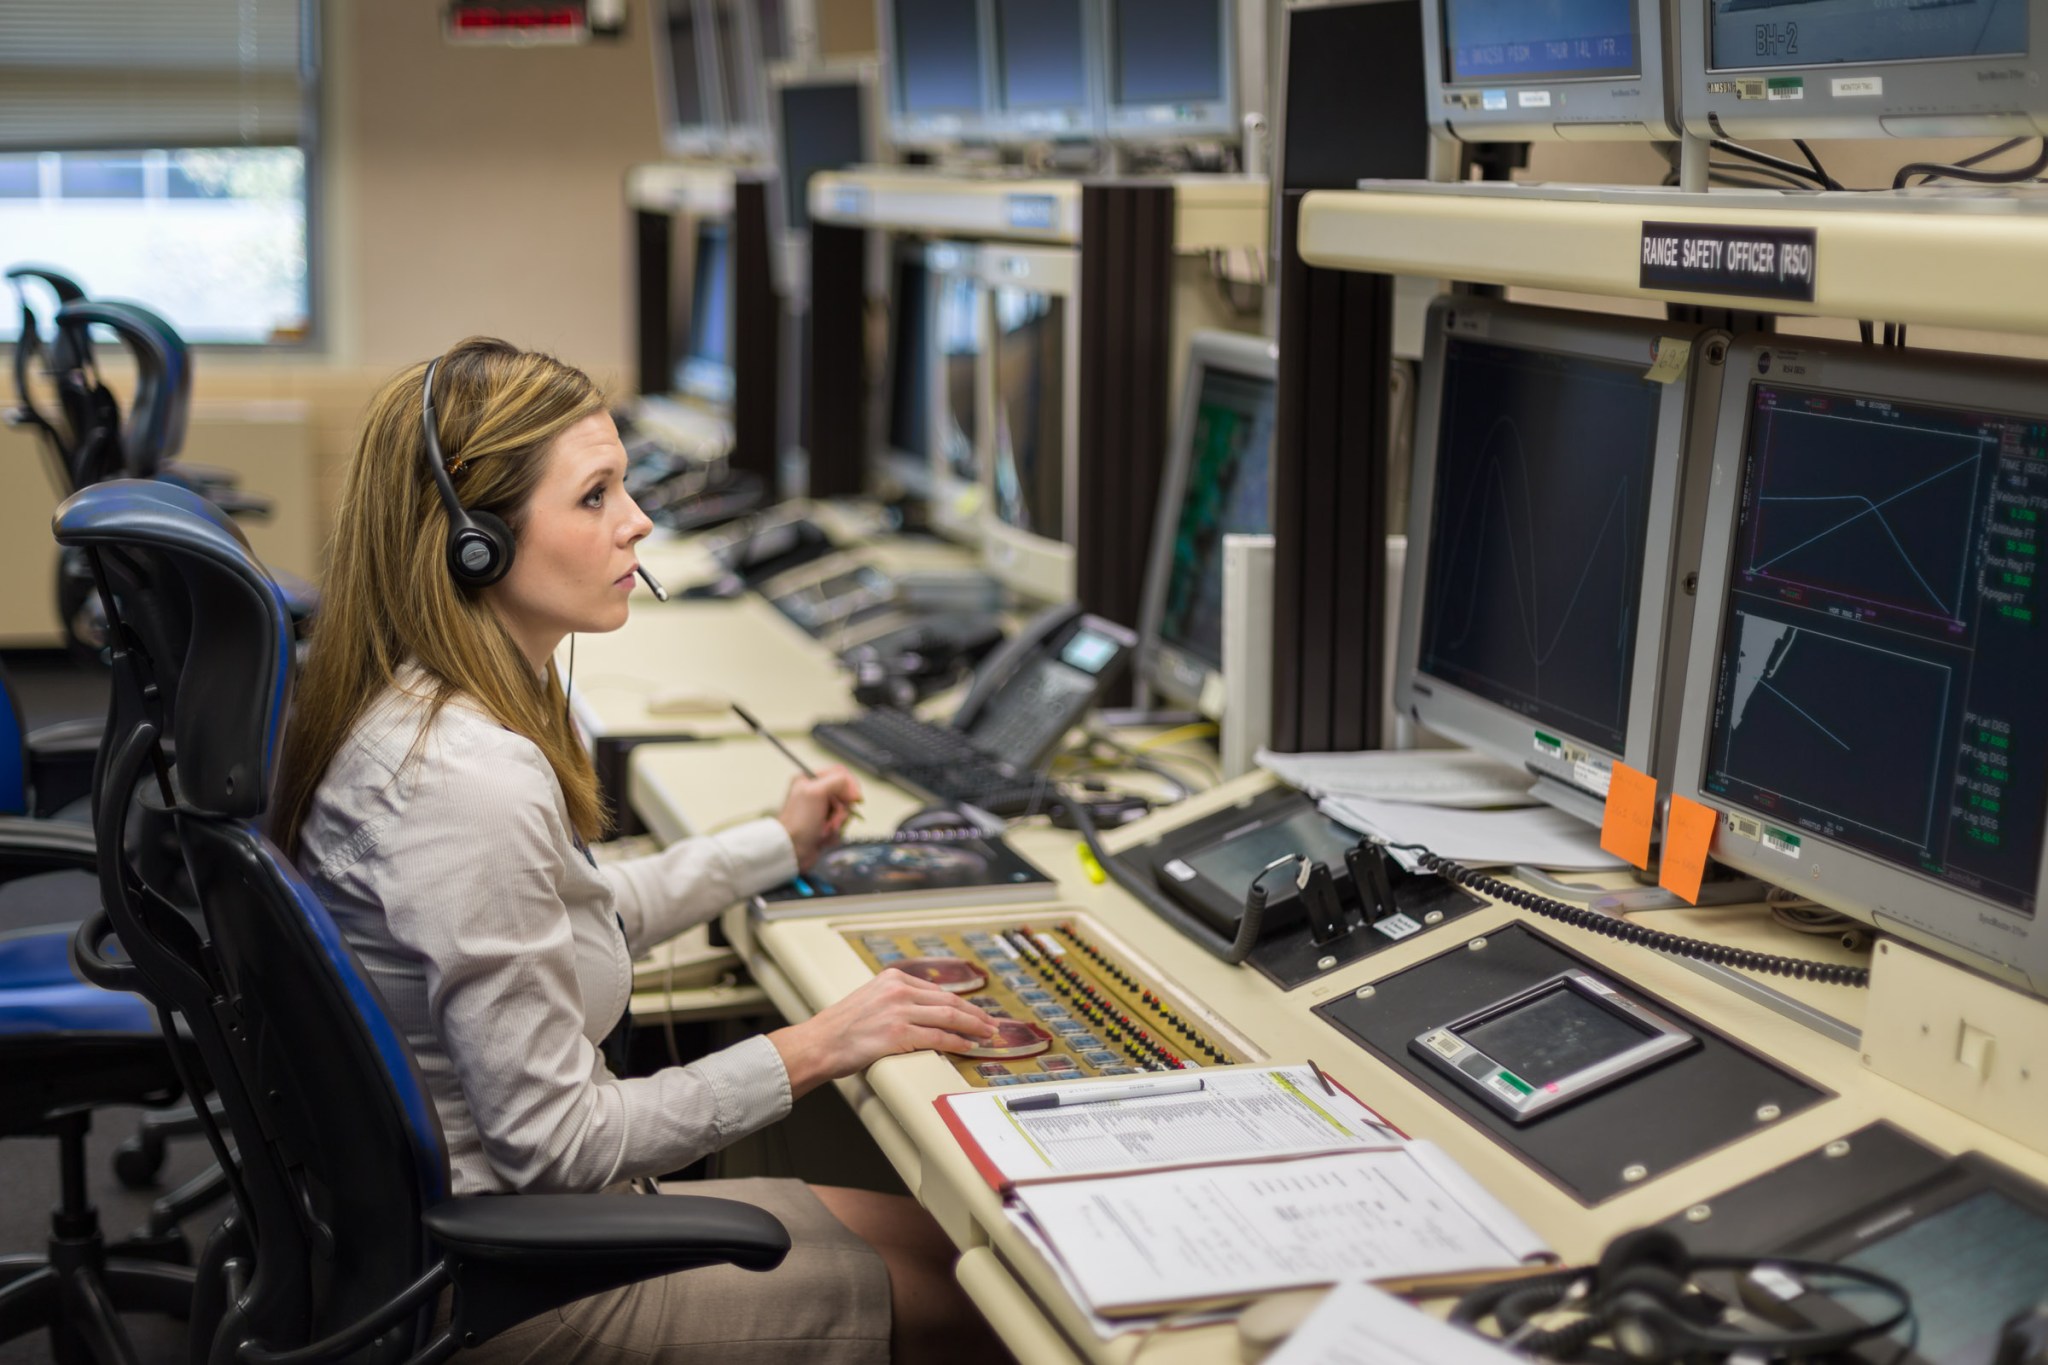 Woman with blonde hair wearing a white button down, tan skirt, and a headset  looks towards two monitors in a mission control room.